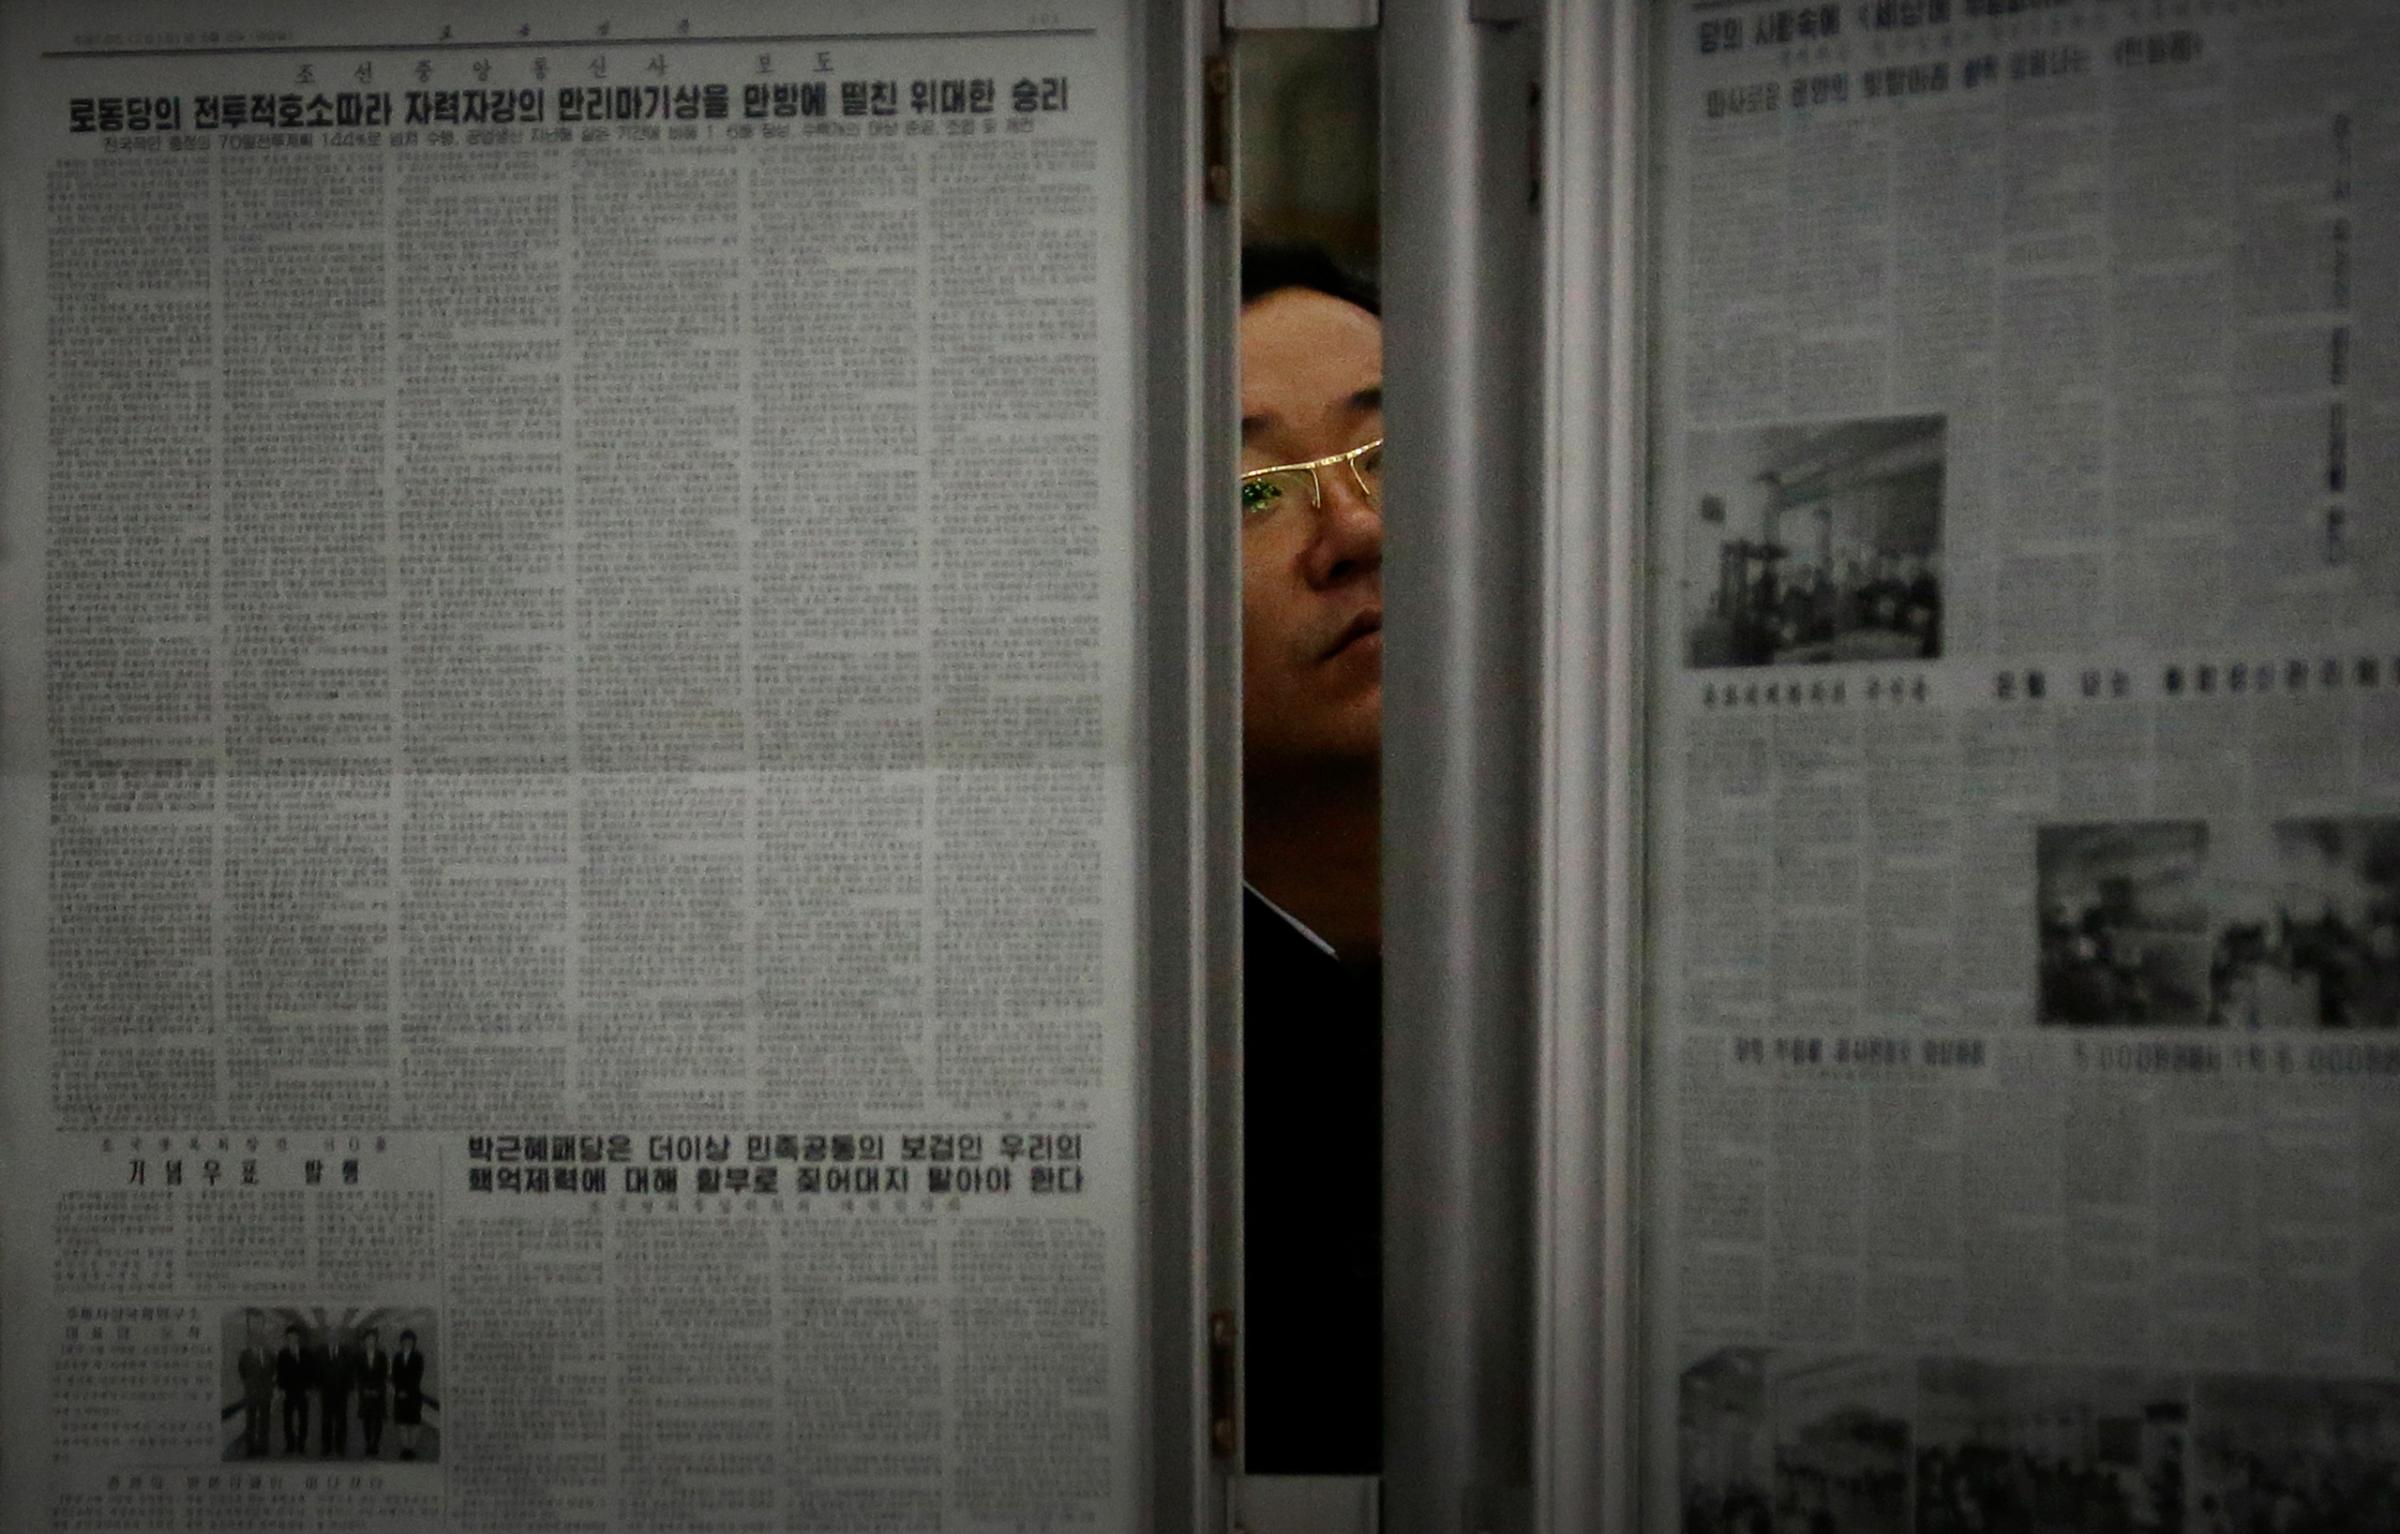 A North Korean man reads the local newspapers displayed in a subway station as seen during a press tour on Saturday, May 7, 2016, in Pyongyang, North Korea. North Korea's ruling party is preparing to bestow its top title on leader Kim Jong Un, another clear sign that the third heir to North Korea's dynasty of Kims is firmly in control despite his country's deepening international isolation over one of his key ambitions, to keep developing more and better nuclear weapons. (AP Photo/Wong Maye-E)